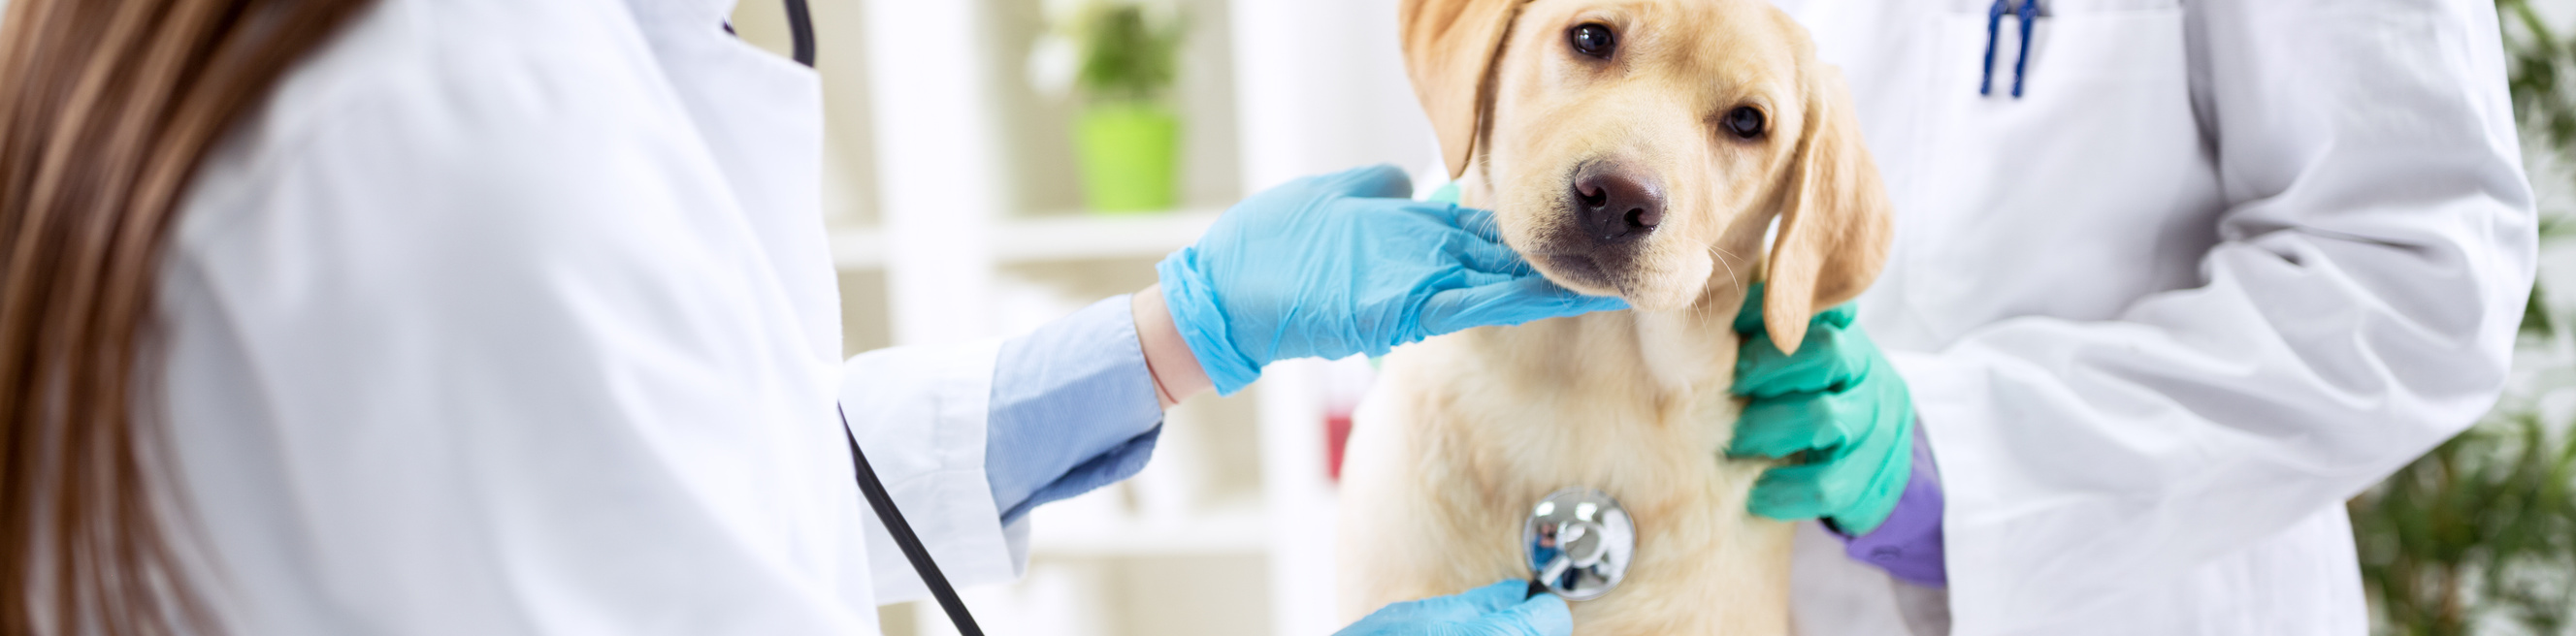 Veterinarian offices business license requirements